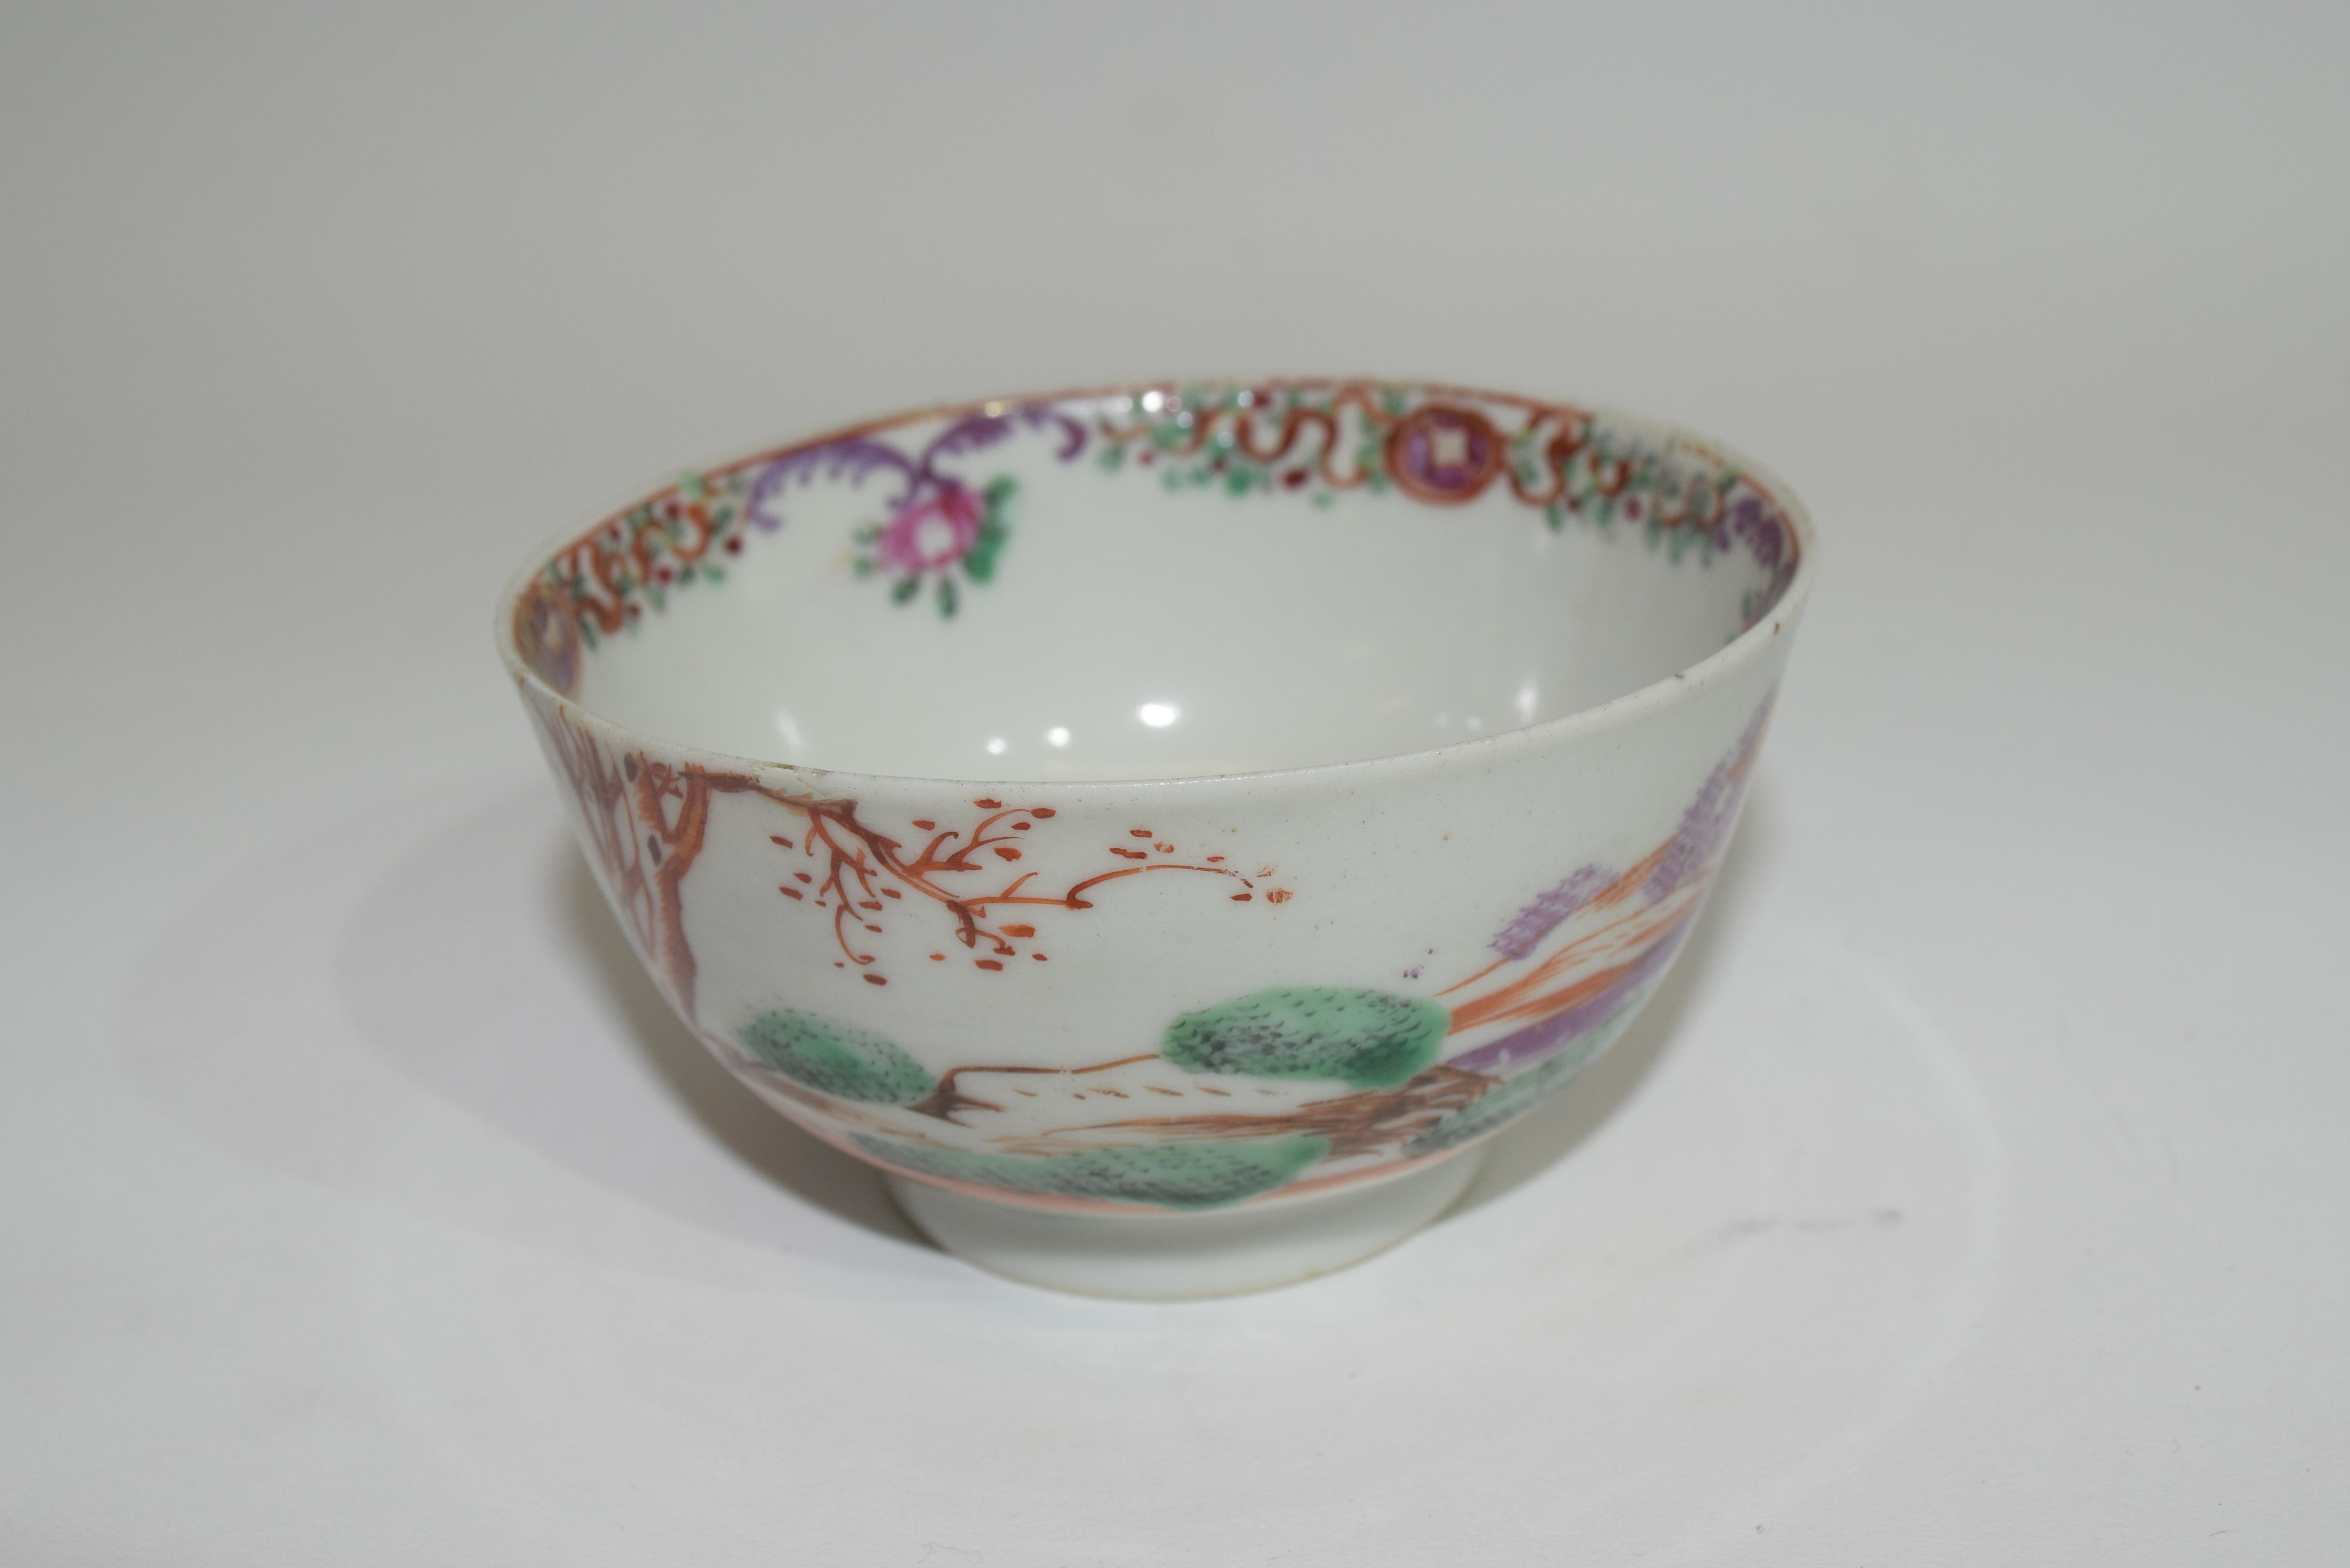 Small Chinese bowl, 18th century, with polychrome design of horses in a landscape, 9cm diam (rim - Image 2 of 3